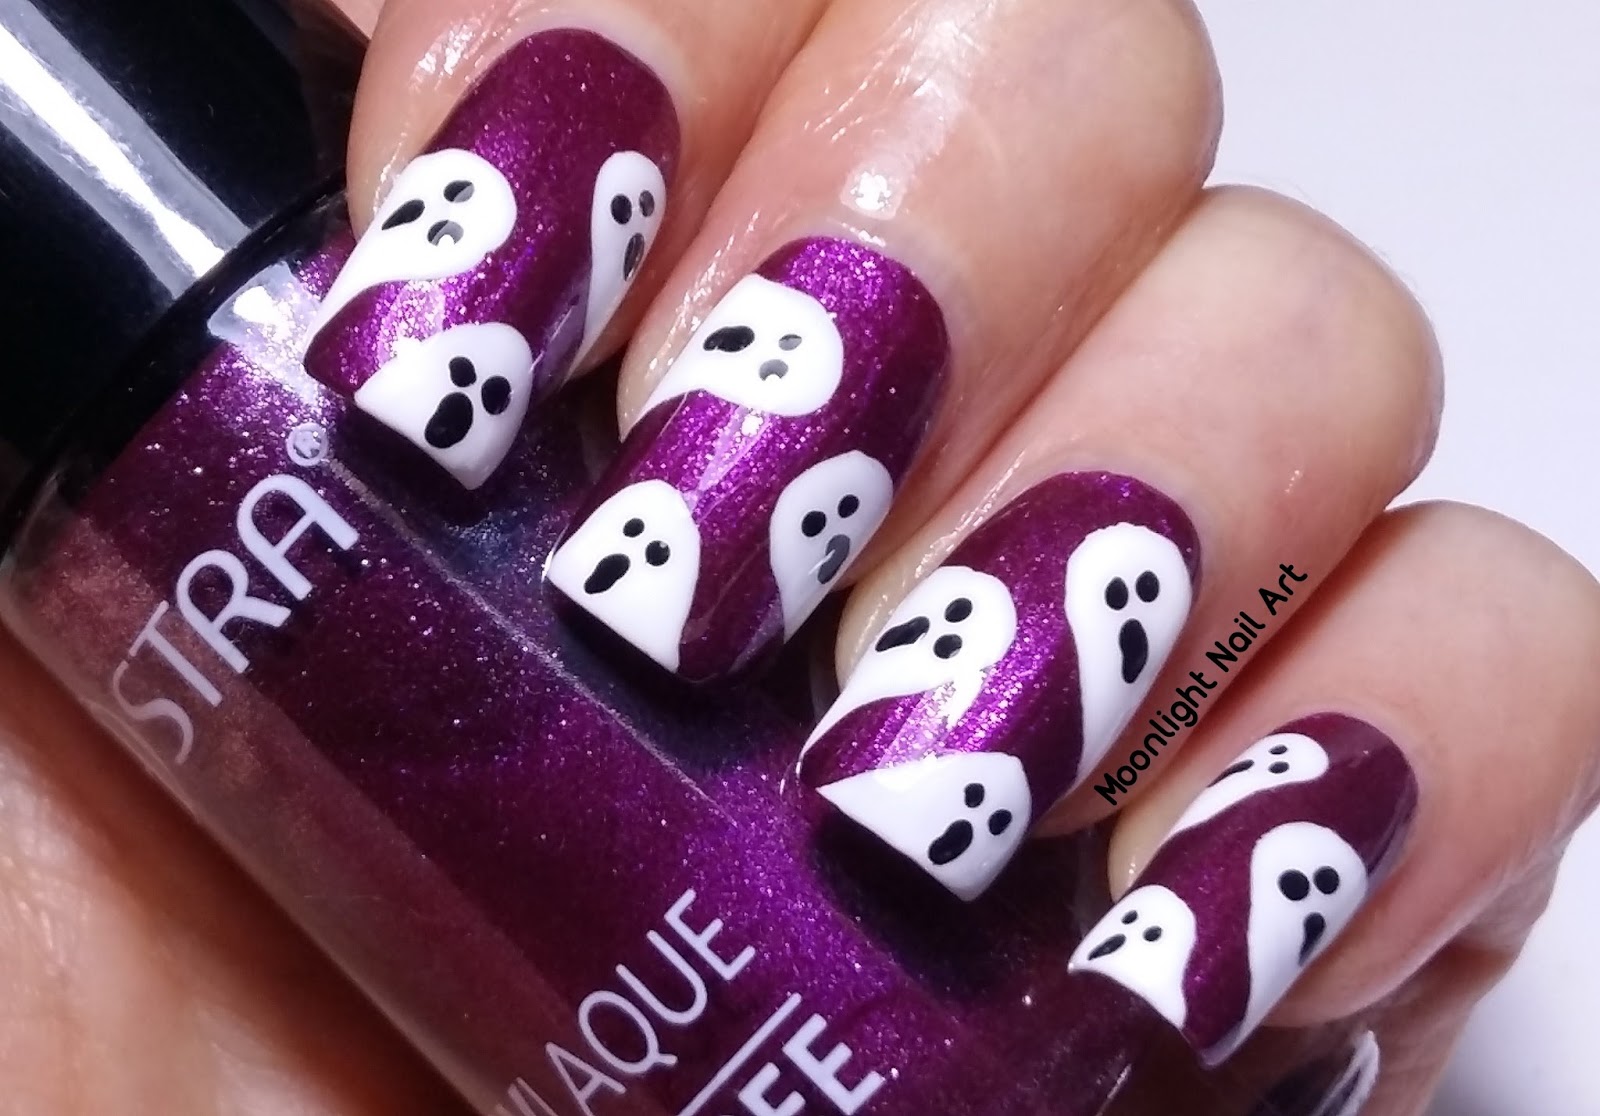 EASY HALLOWEEN GHOST NAIL DESIGN - Nail Art Using Toothpick - Video Tutorial